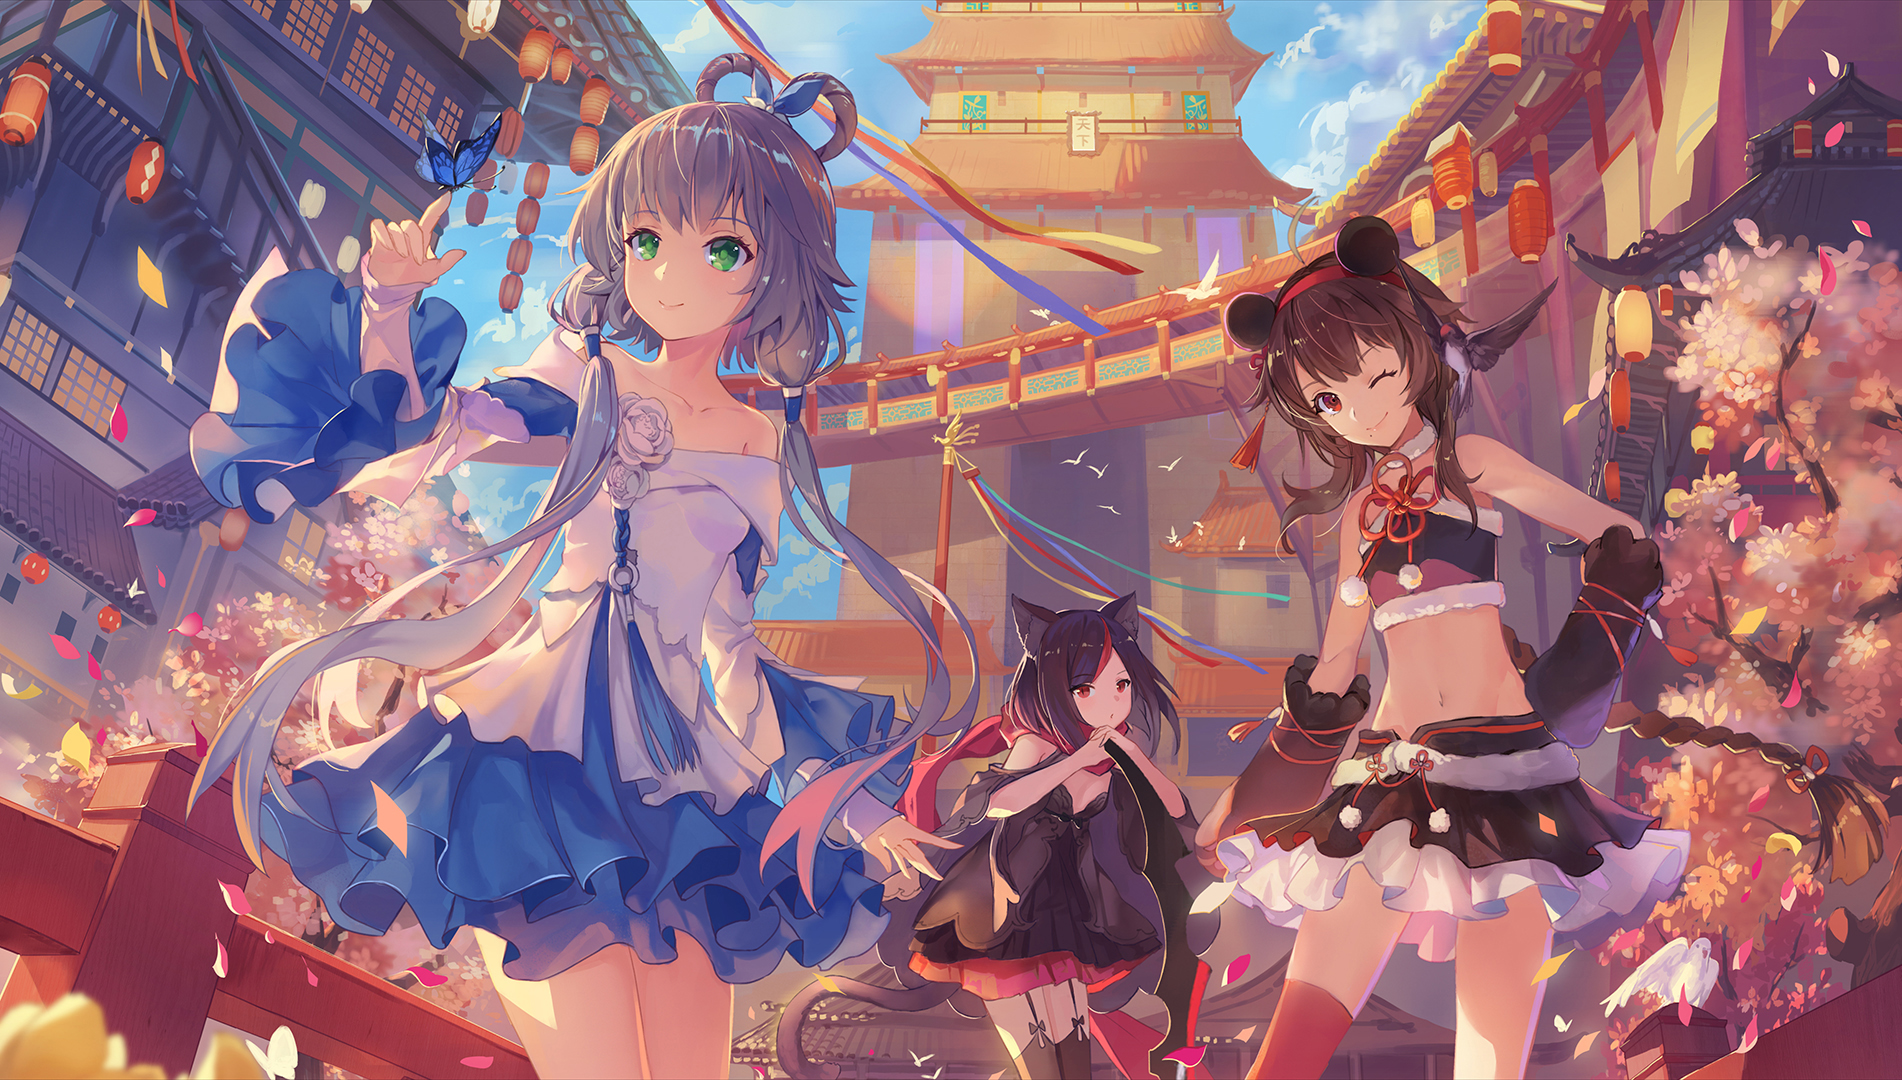 Anime 1902x1080 Luo Tianyi (vocaloid) Yuezheng Ling Vocaloid artwork anime girls animal ears brunette silver hair green eyes red eyes wink dress crop top